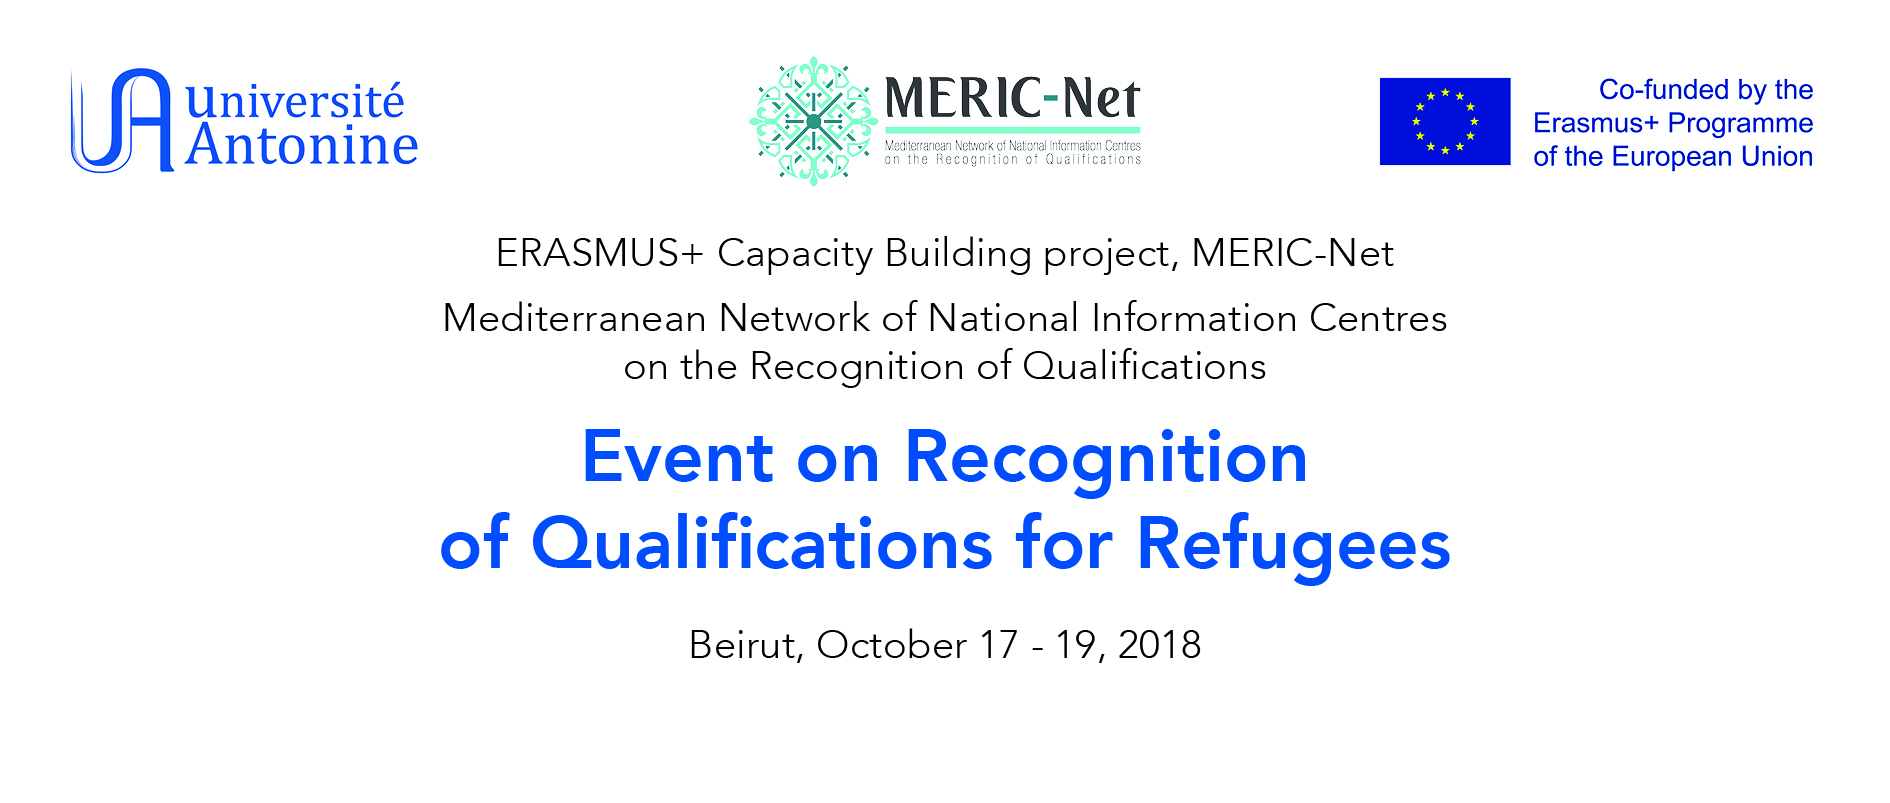 Event on Recognition of Qualifications for Refugees